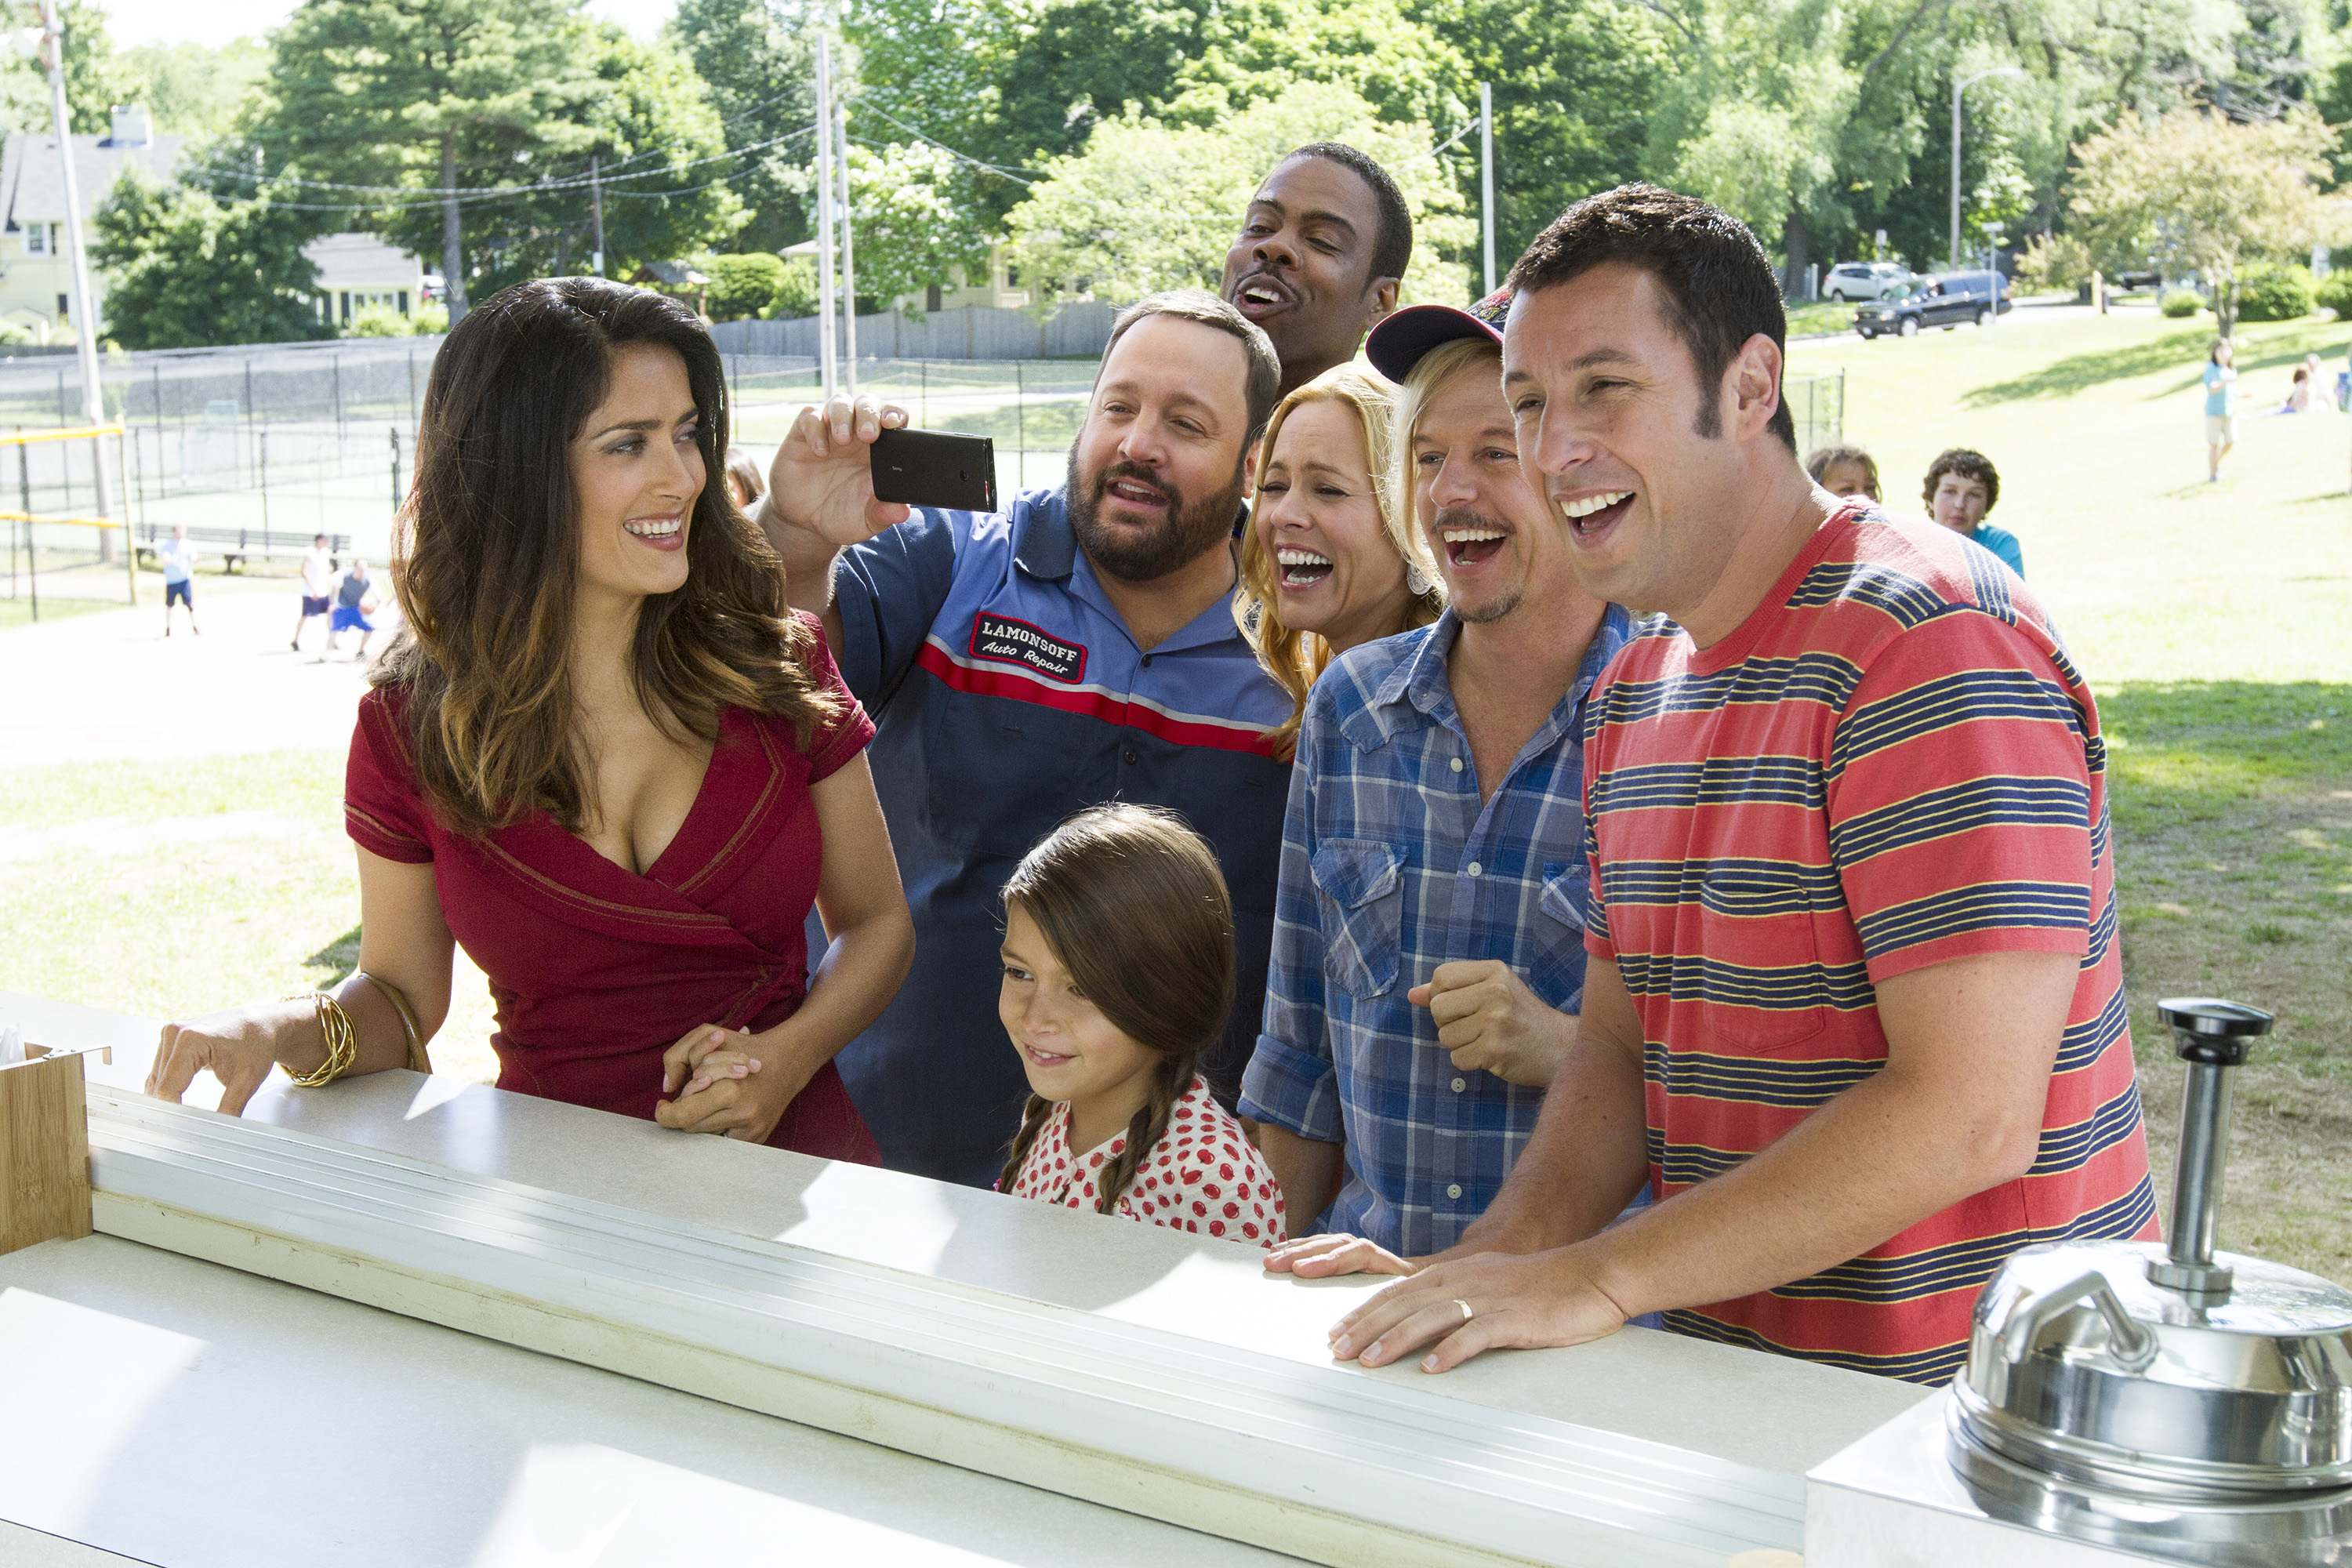 Movie Trailer: Grown Ups 2 reunites the gang for more lowbrow humor